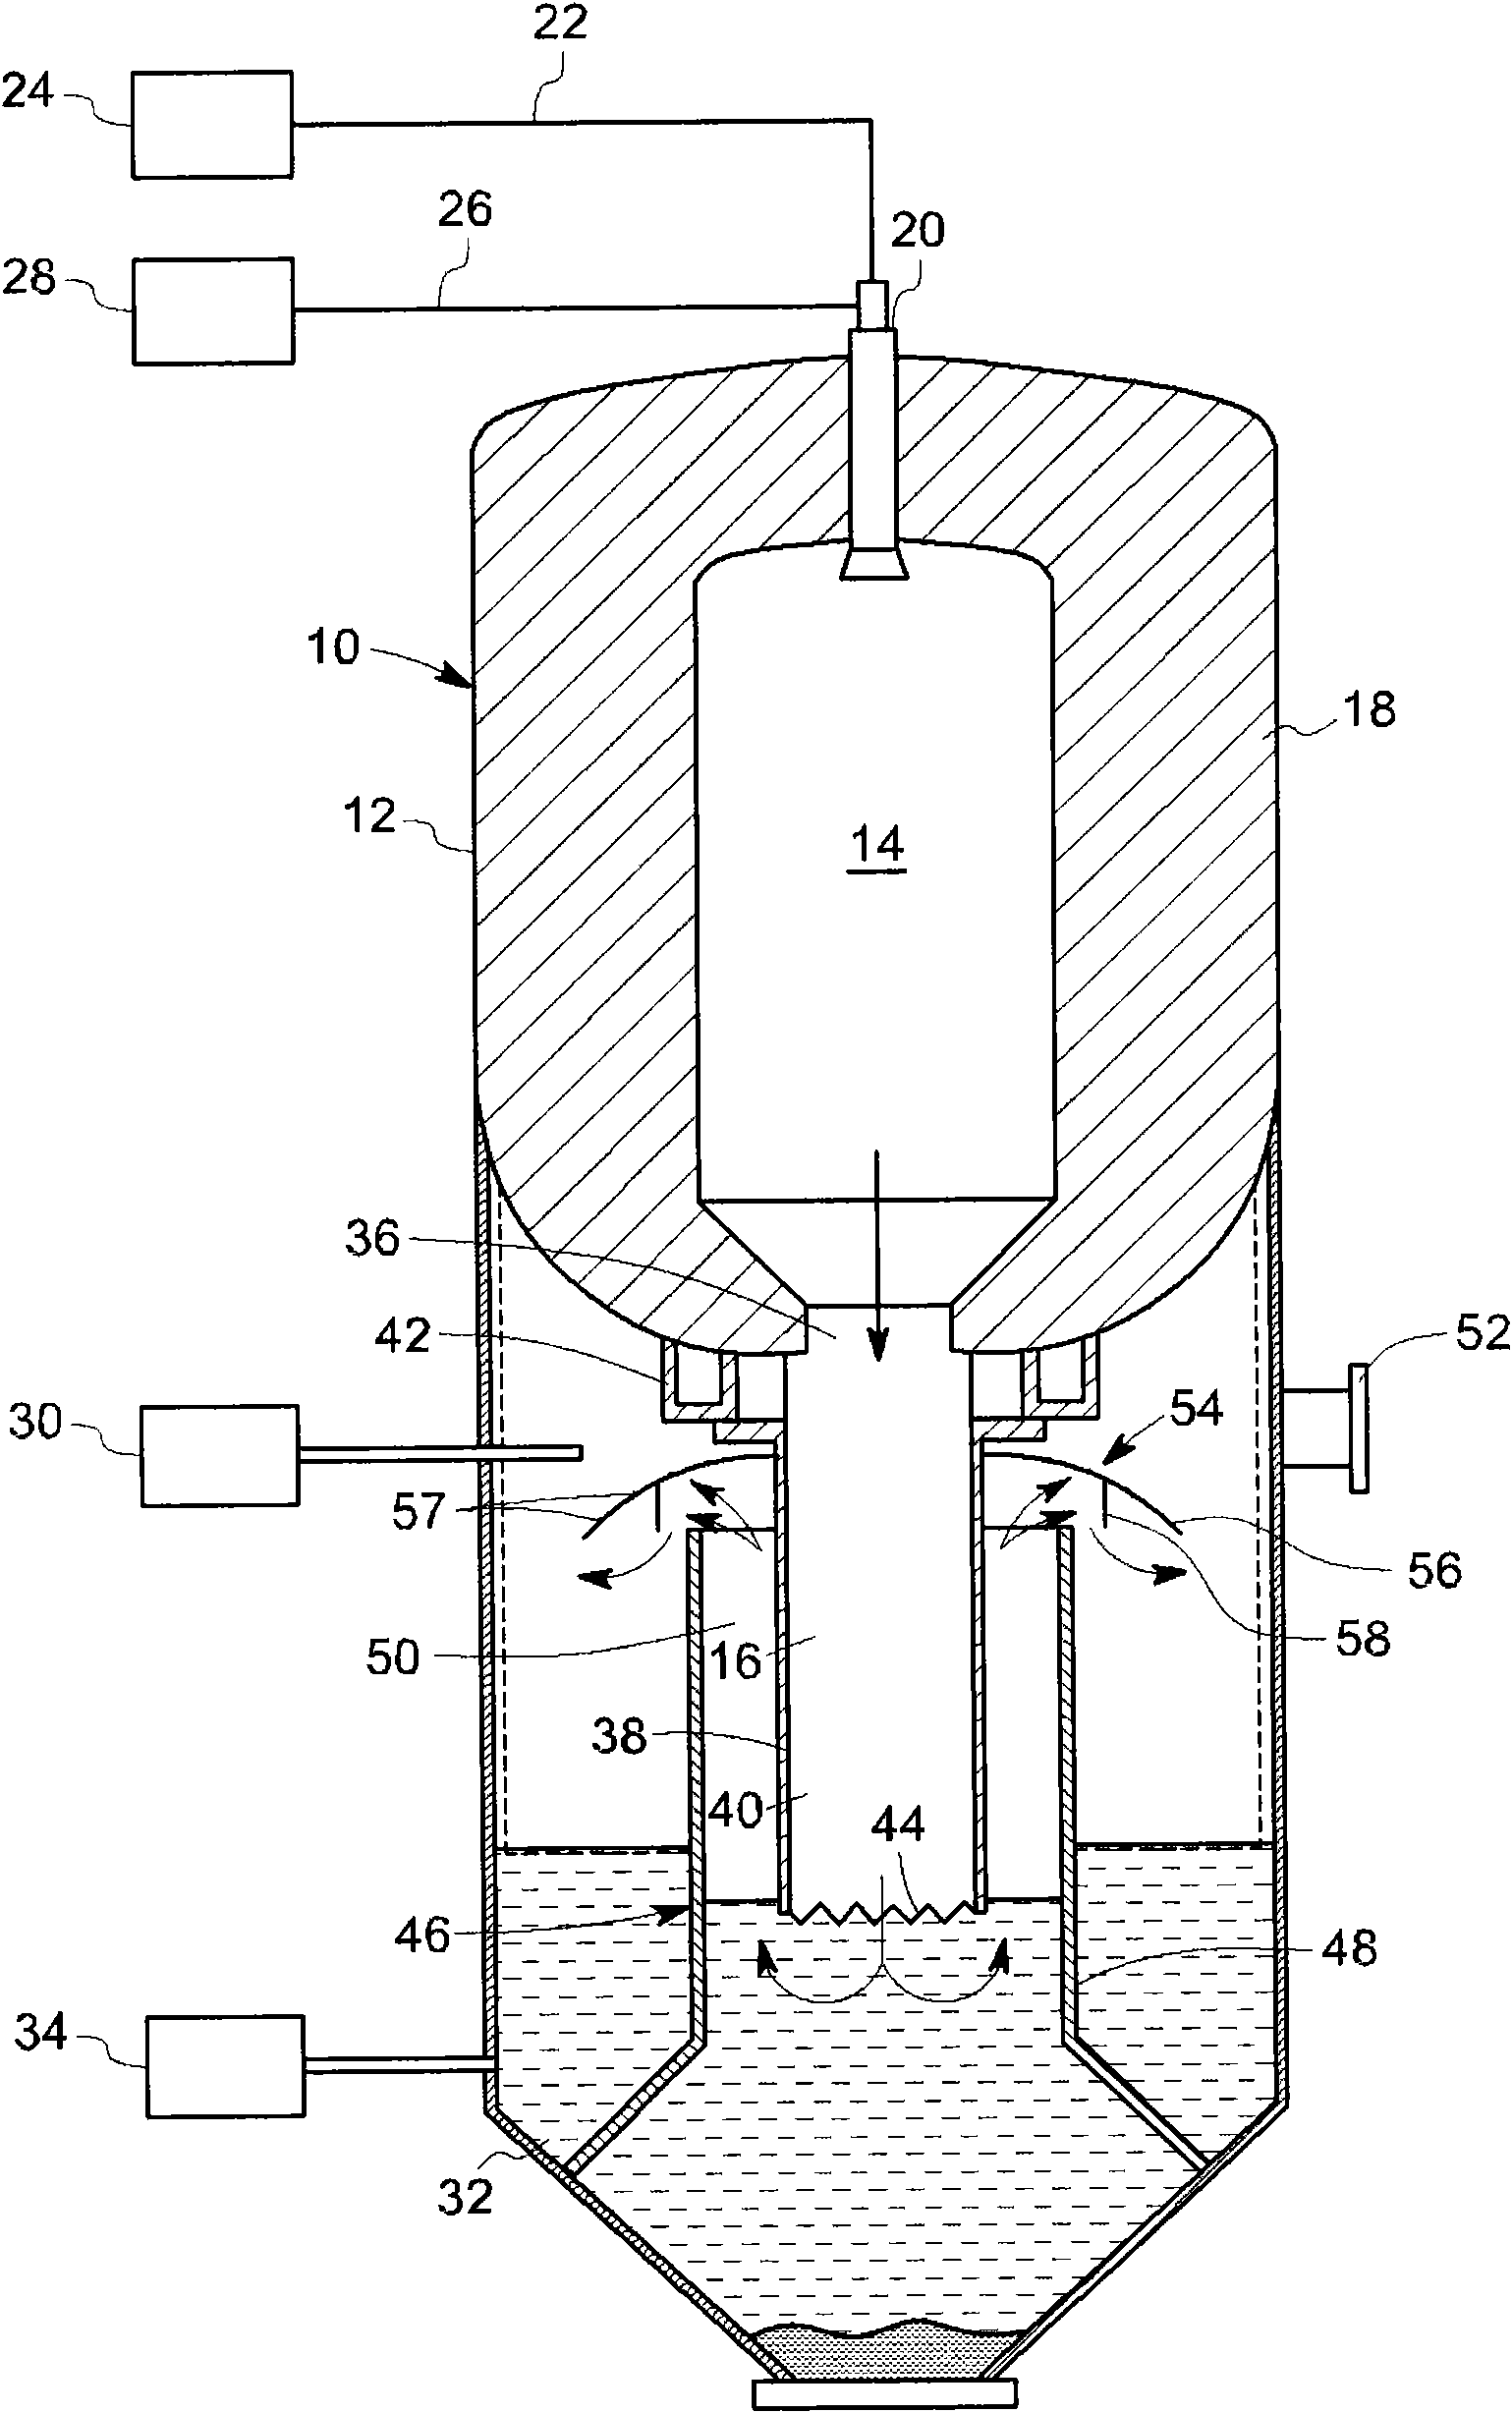 Cooling chamber assembly for a gasifier